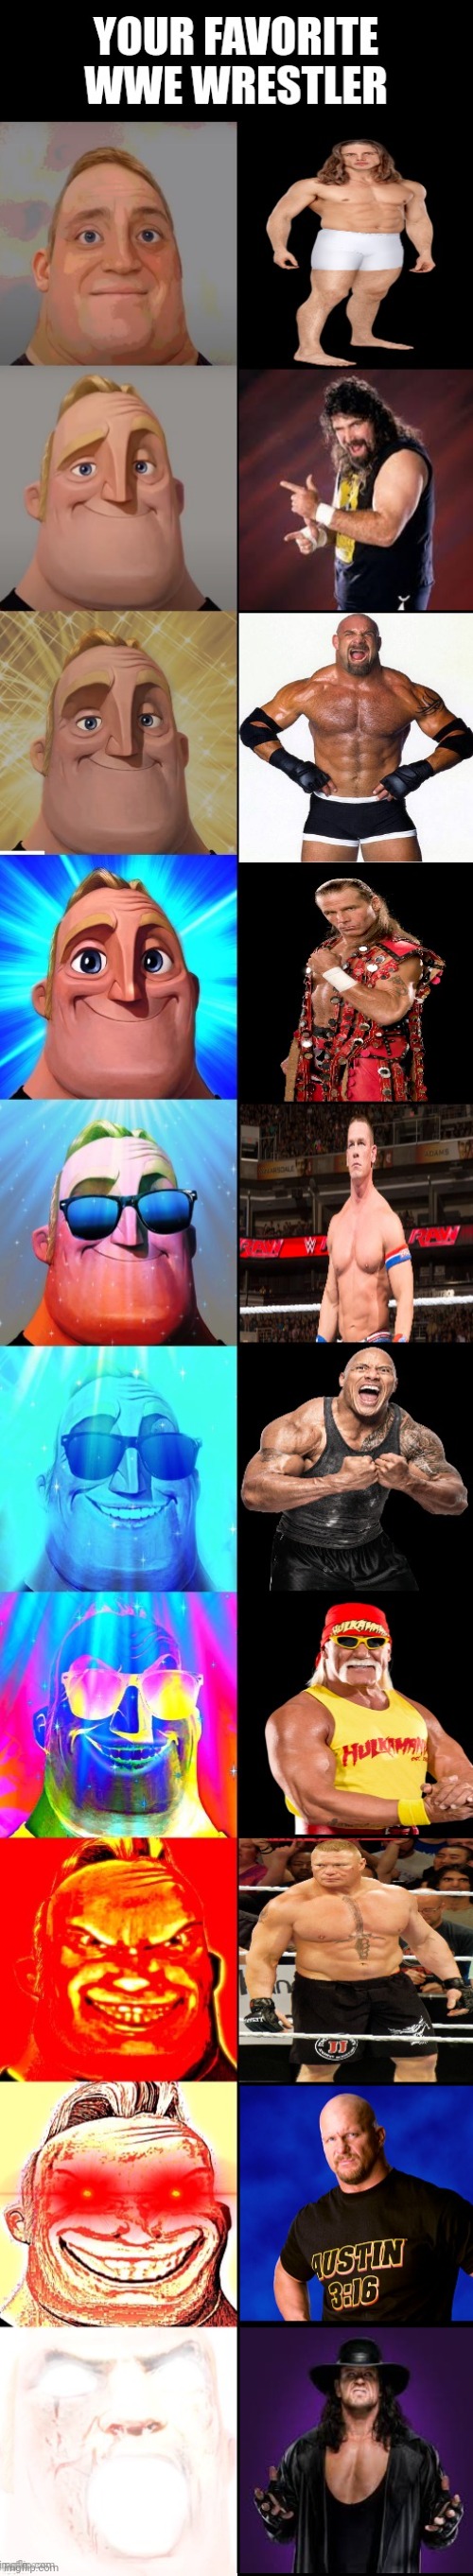 Finally. | image tagged in mr incredible becoming canny,wwe,pro wrestling,wrestling,the rock,john cena | made w/ Imgflip meme maker